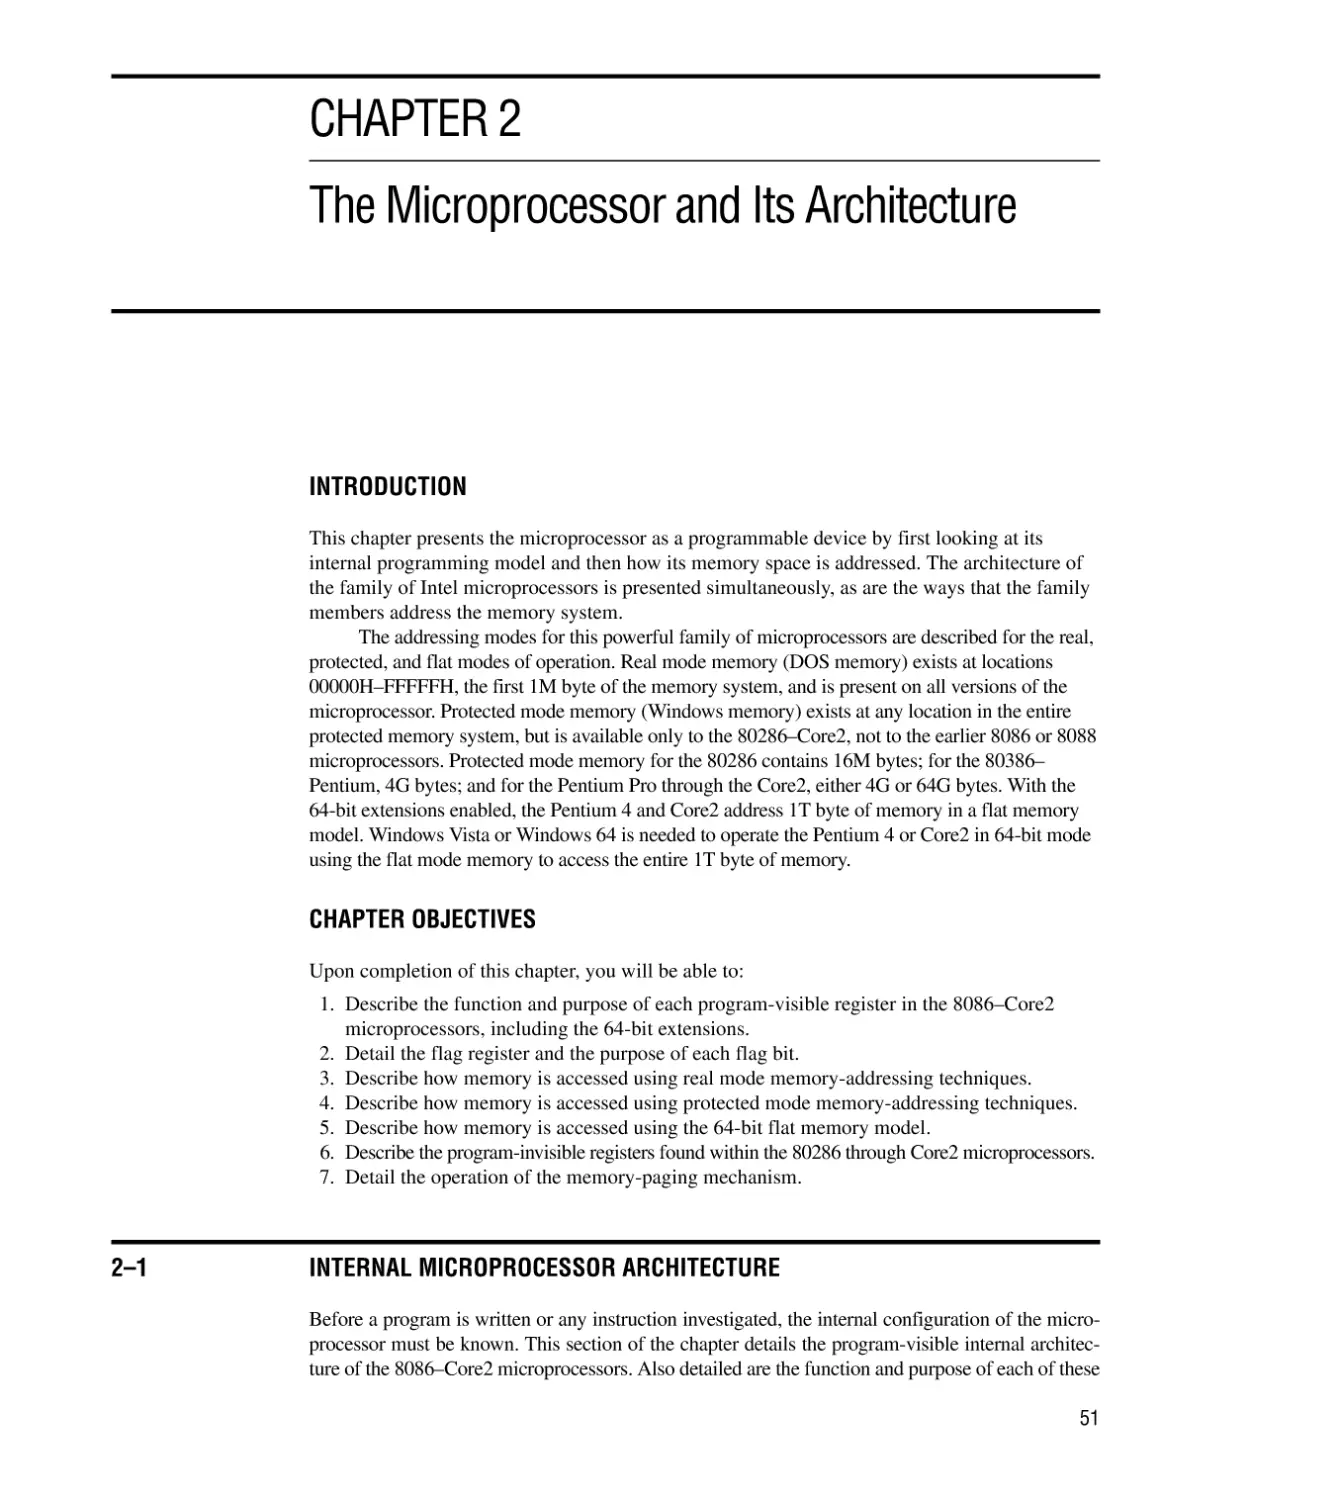 CHAPTER 2 THE MICROPROCESSOR AND ITS ARCHITECTURE
Introduction/Chapter Objectives
2–1 Internal Microprocessor Architecture